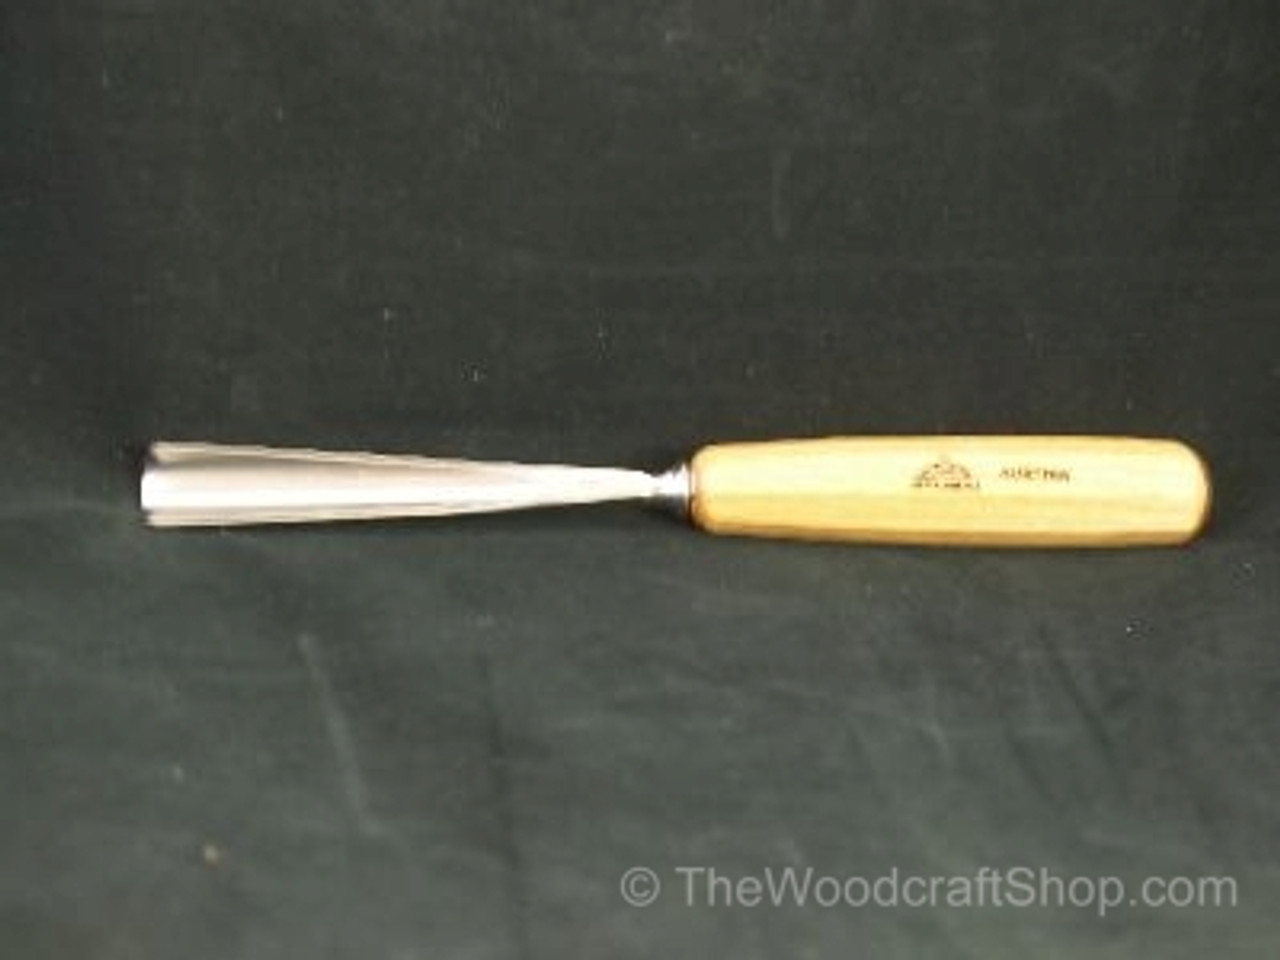 The image shows the Stubai Full Size #9 Deep Gouge 20mm handle and blade profile.